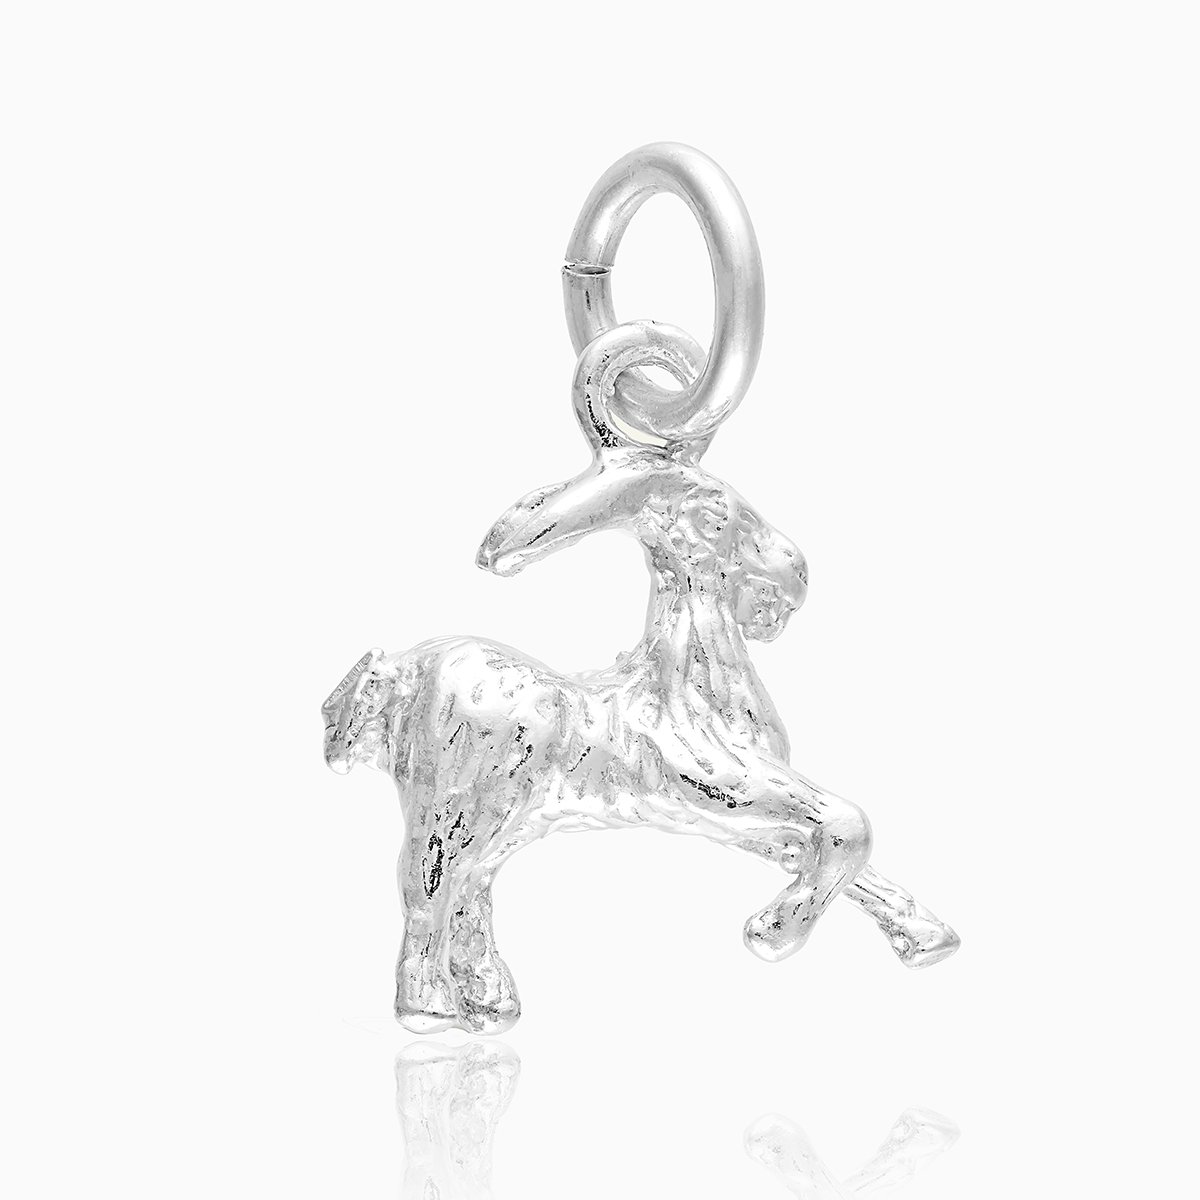 Product title: Capricorn Silver Charm, product type: Charm